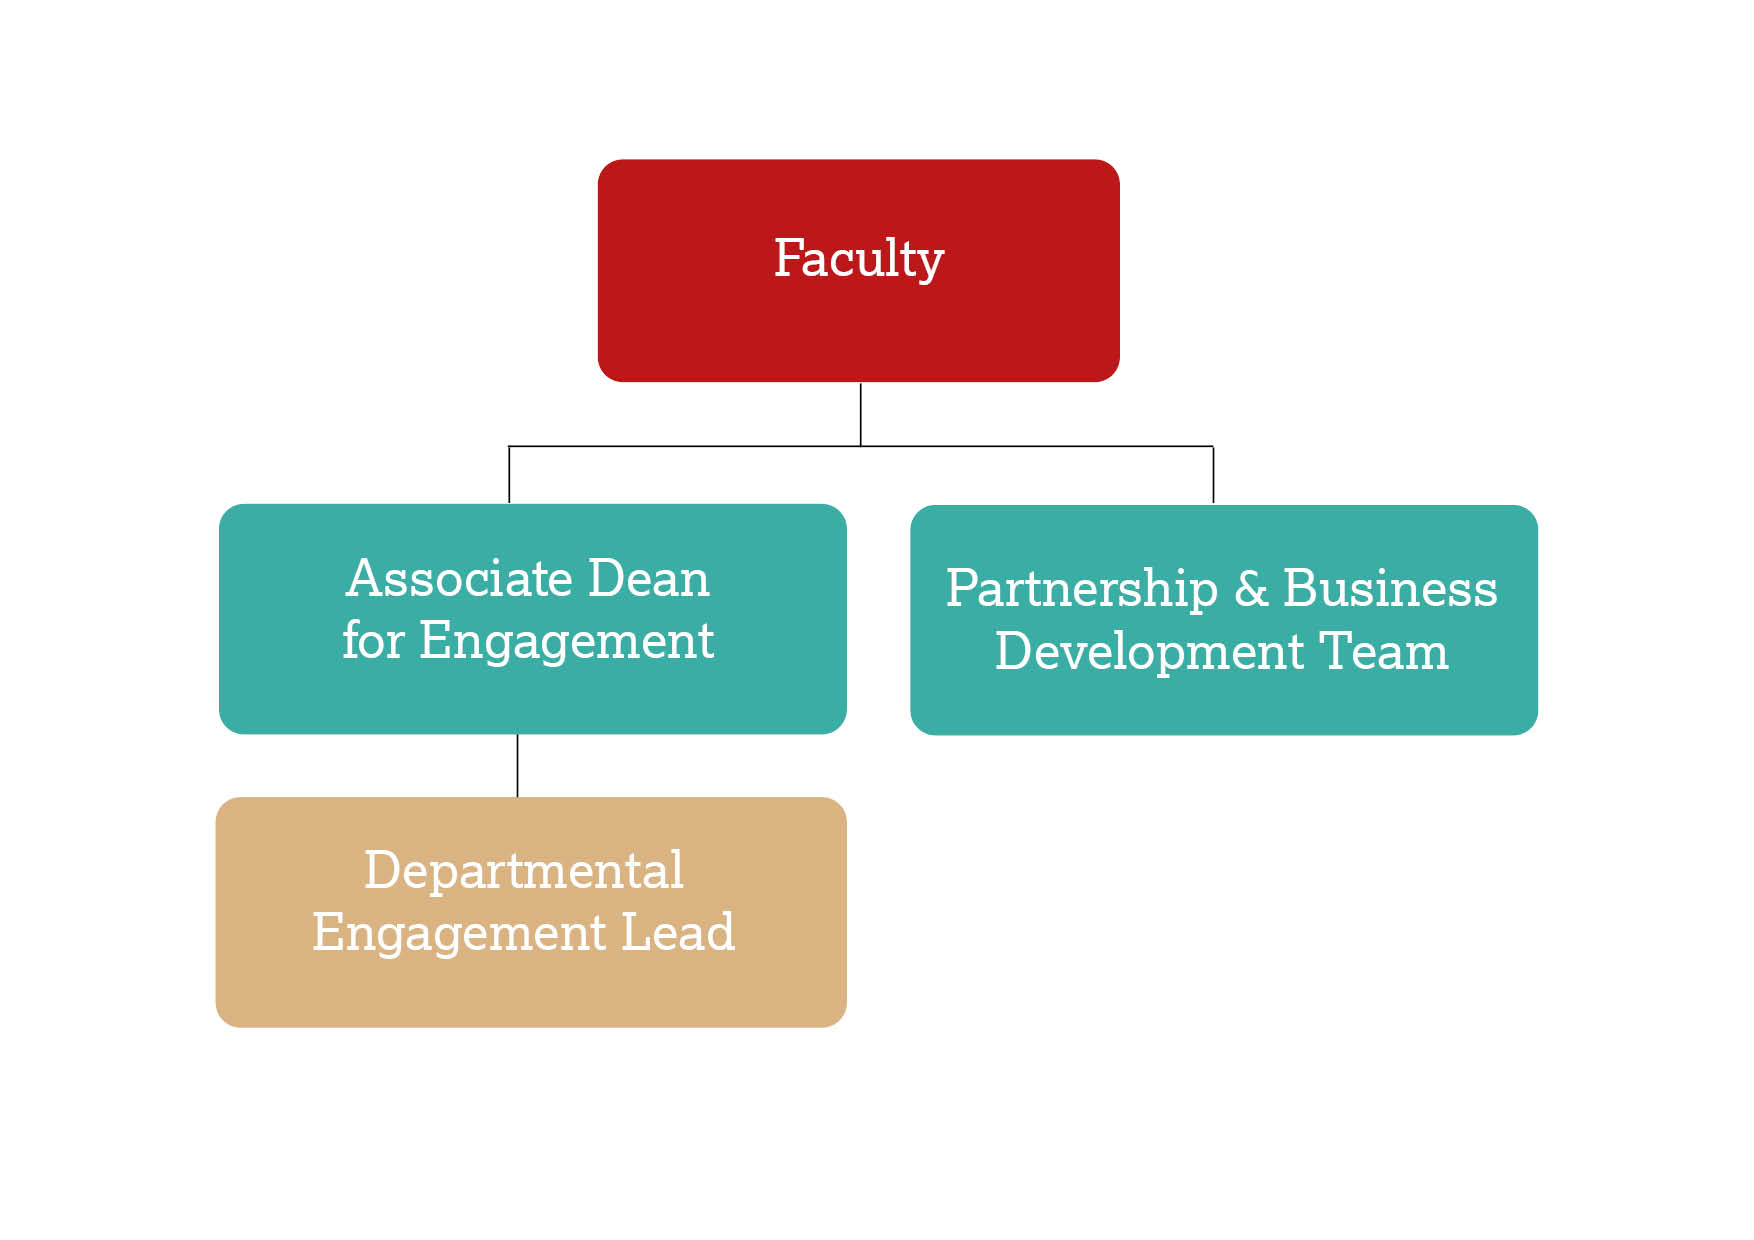 Organisation chart showing faculty and departmental support for engagement. 'Faculty' is at the top. This branches into 'Associate Deans for Engagement' and 'Partnership and Business Development Teams'. Associate Deans branches down to 'Departmental Engagement Leads'. 